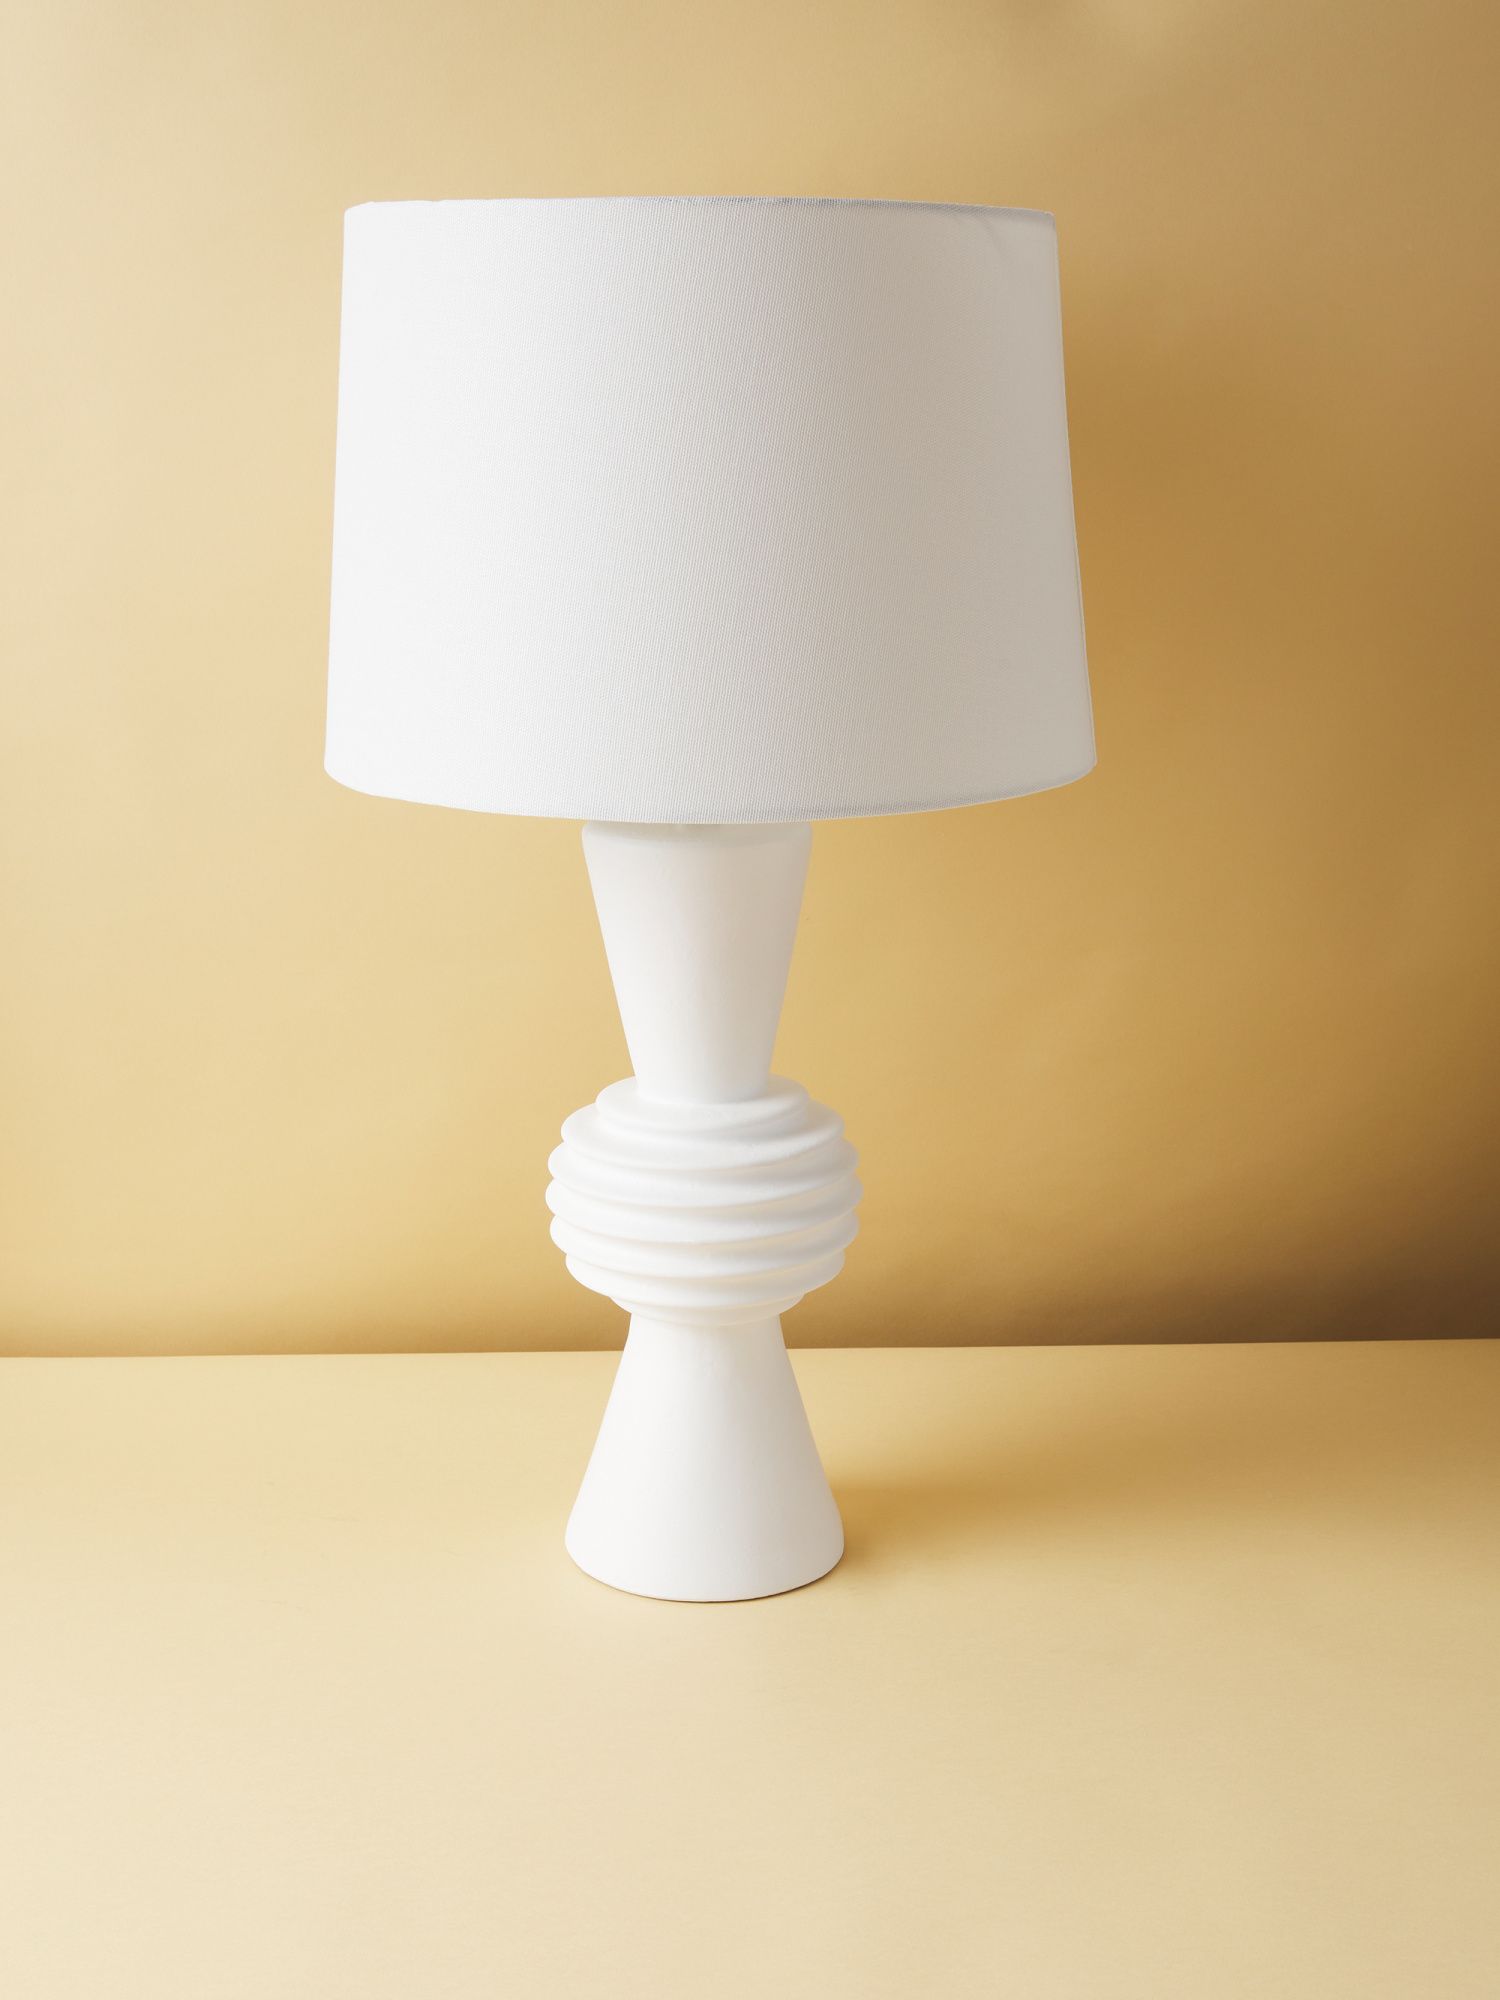 28in Ceramic Hourglass Table Lamp | Table Lamps | HomeGoods | HomeGoods